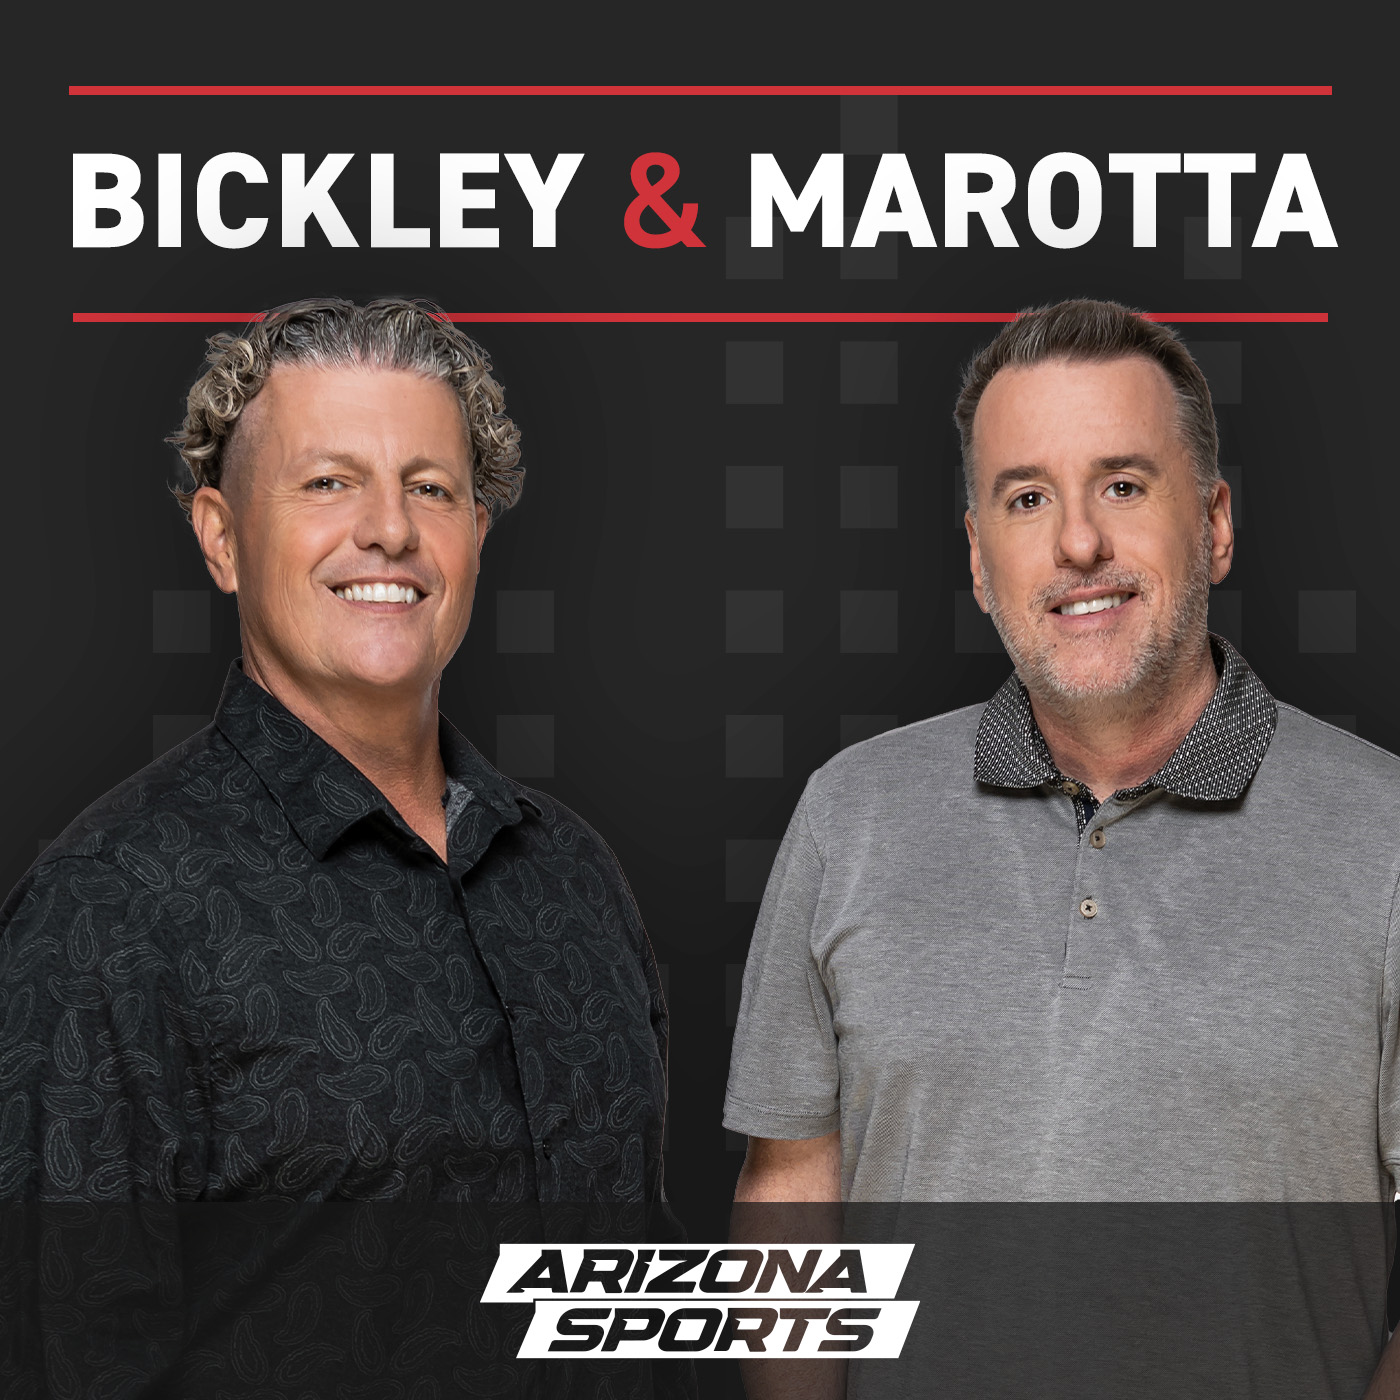 Bickley&Marotta talk about why the Diamondbacks are real contenders